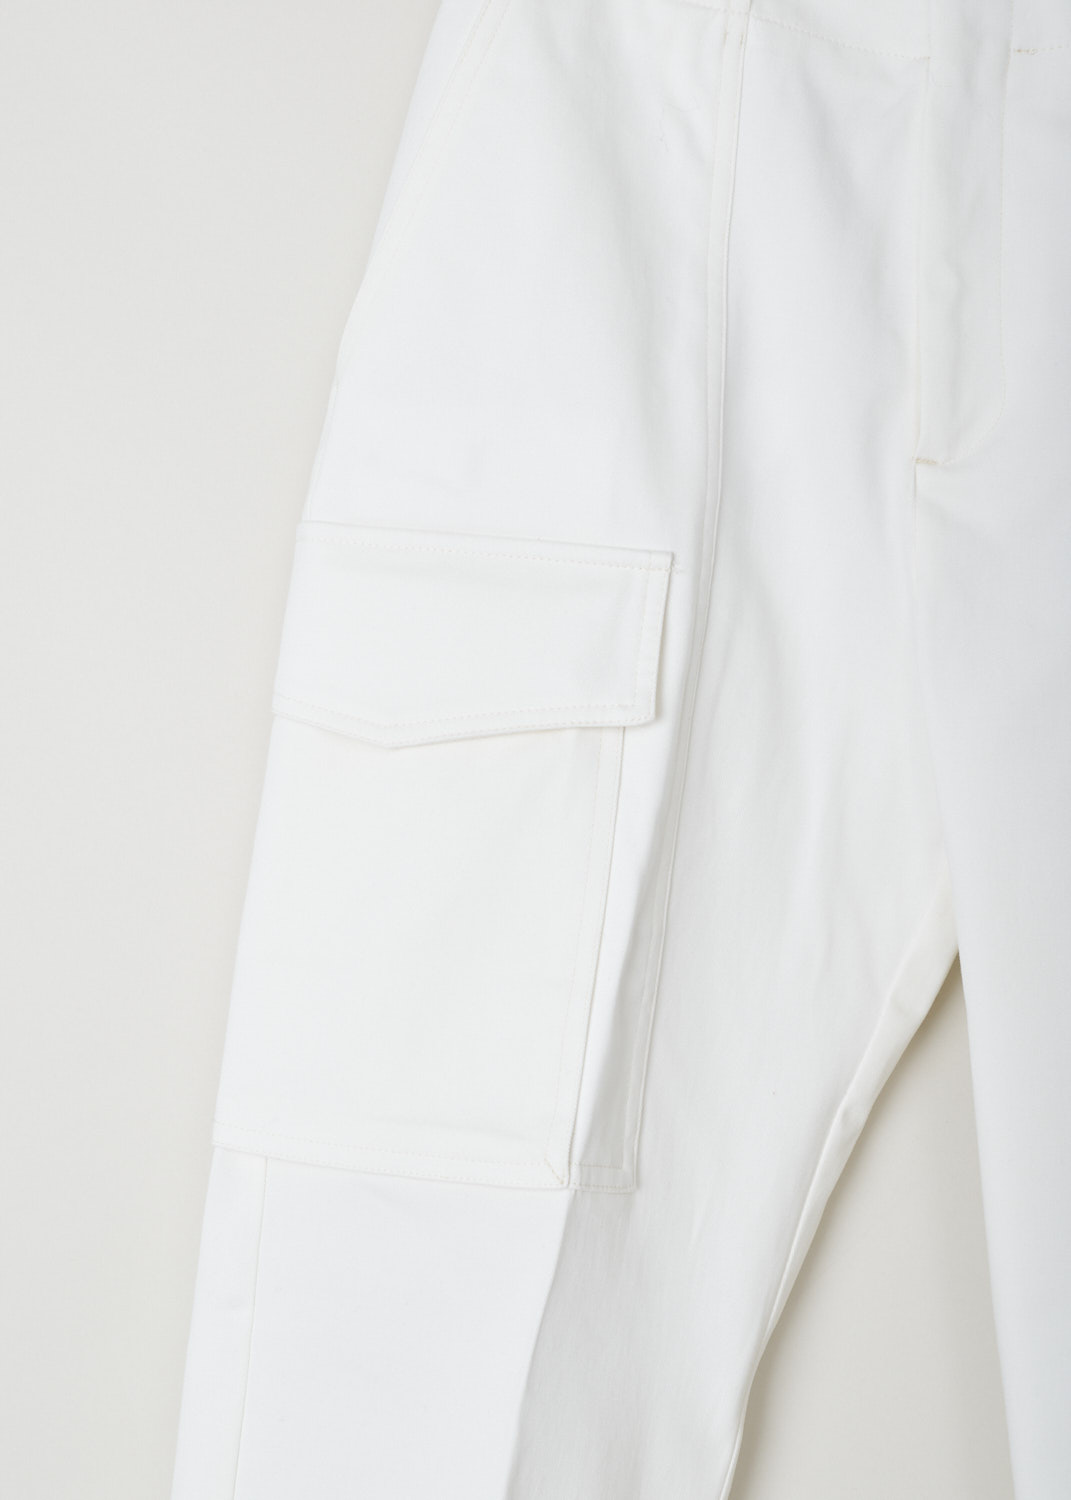 Closed, Wide fitted flat front chino, clea_C91597_30T_22_218, white, detail, A white chino cut in the flat front model with a wide fit. Featuring forward slated pockets on the front and welted pockets on the back. Further decorating the front is a functional cargo pocket.